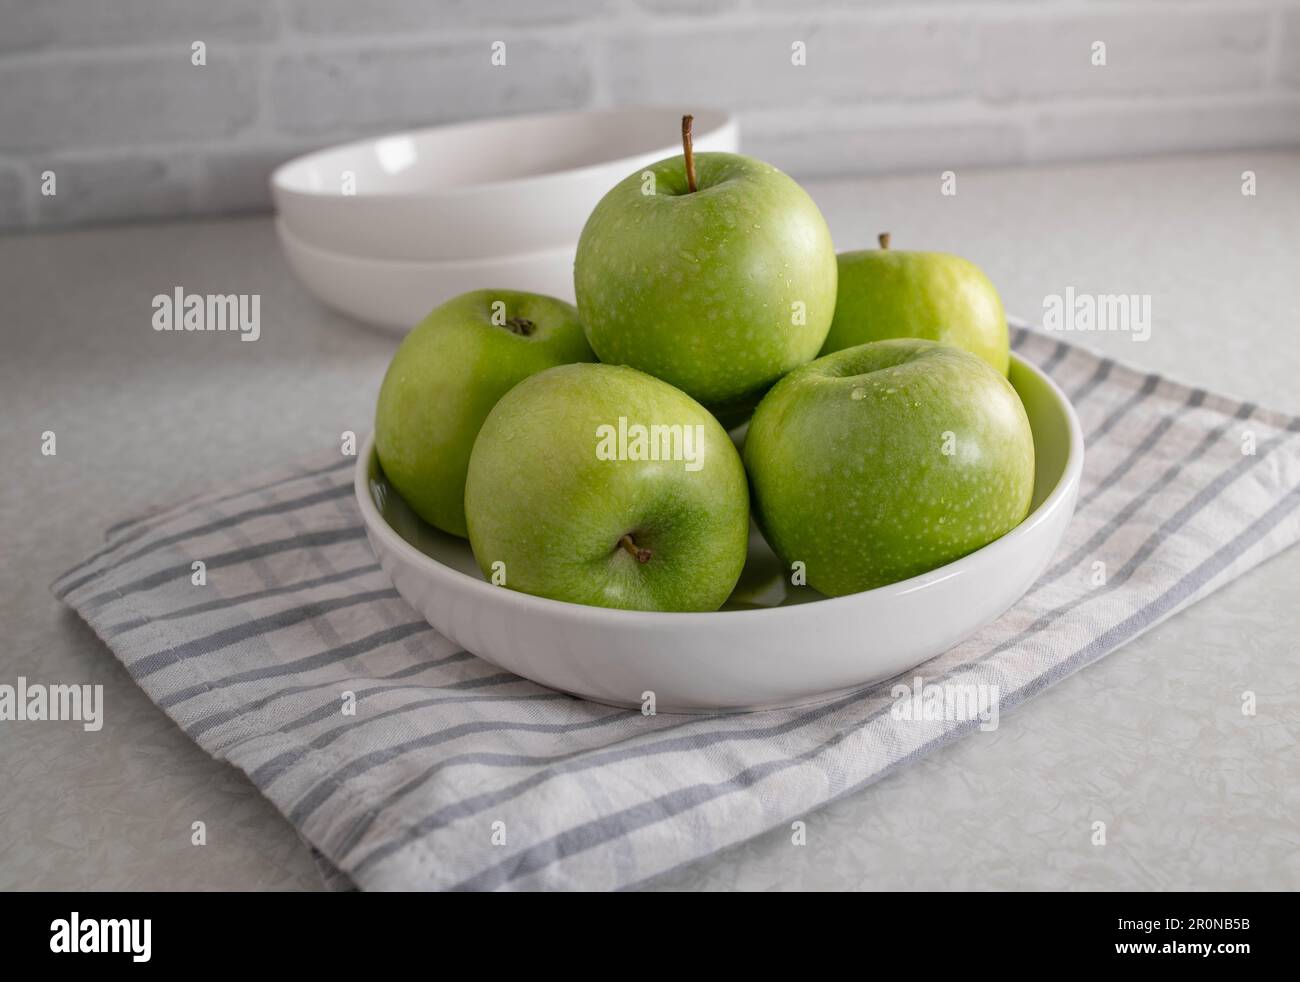 Green apples in a white bowl on kitchen table Stock Photo